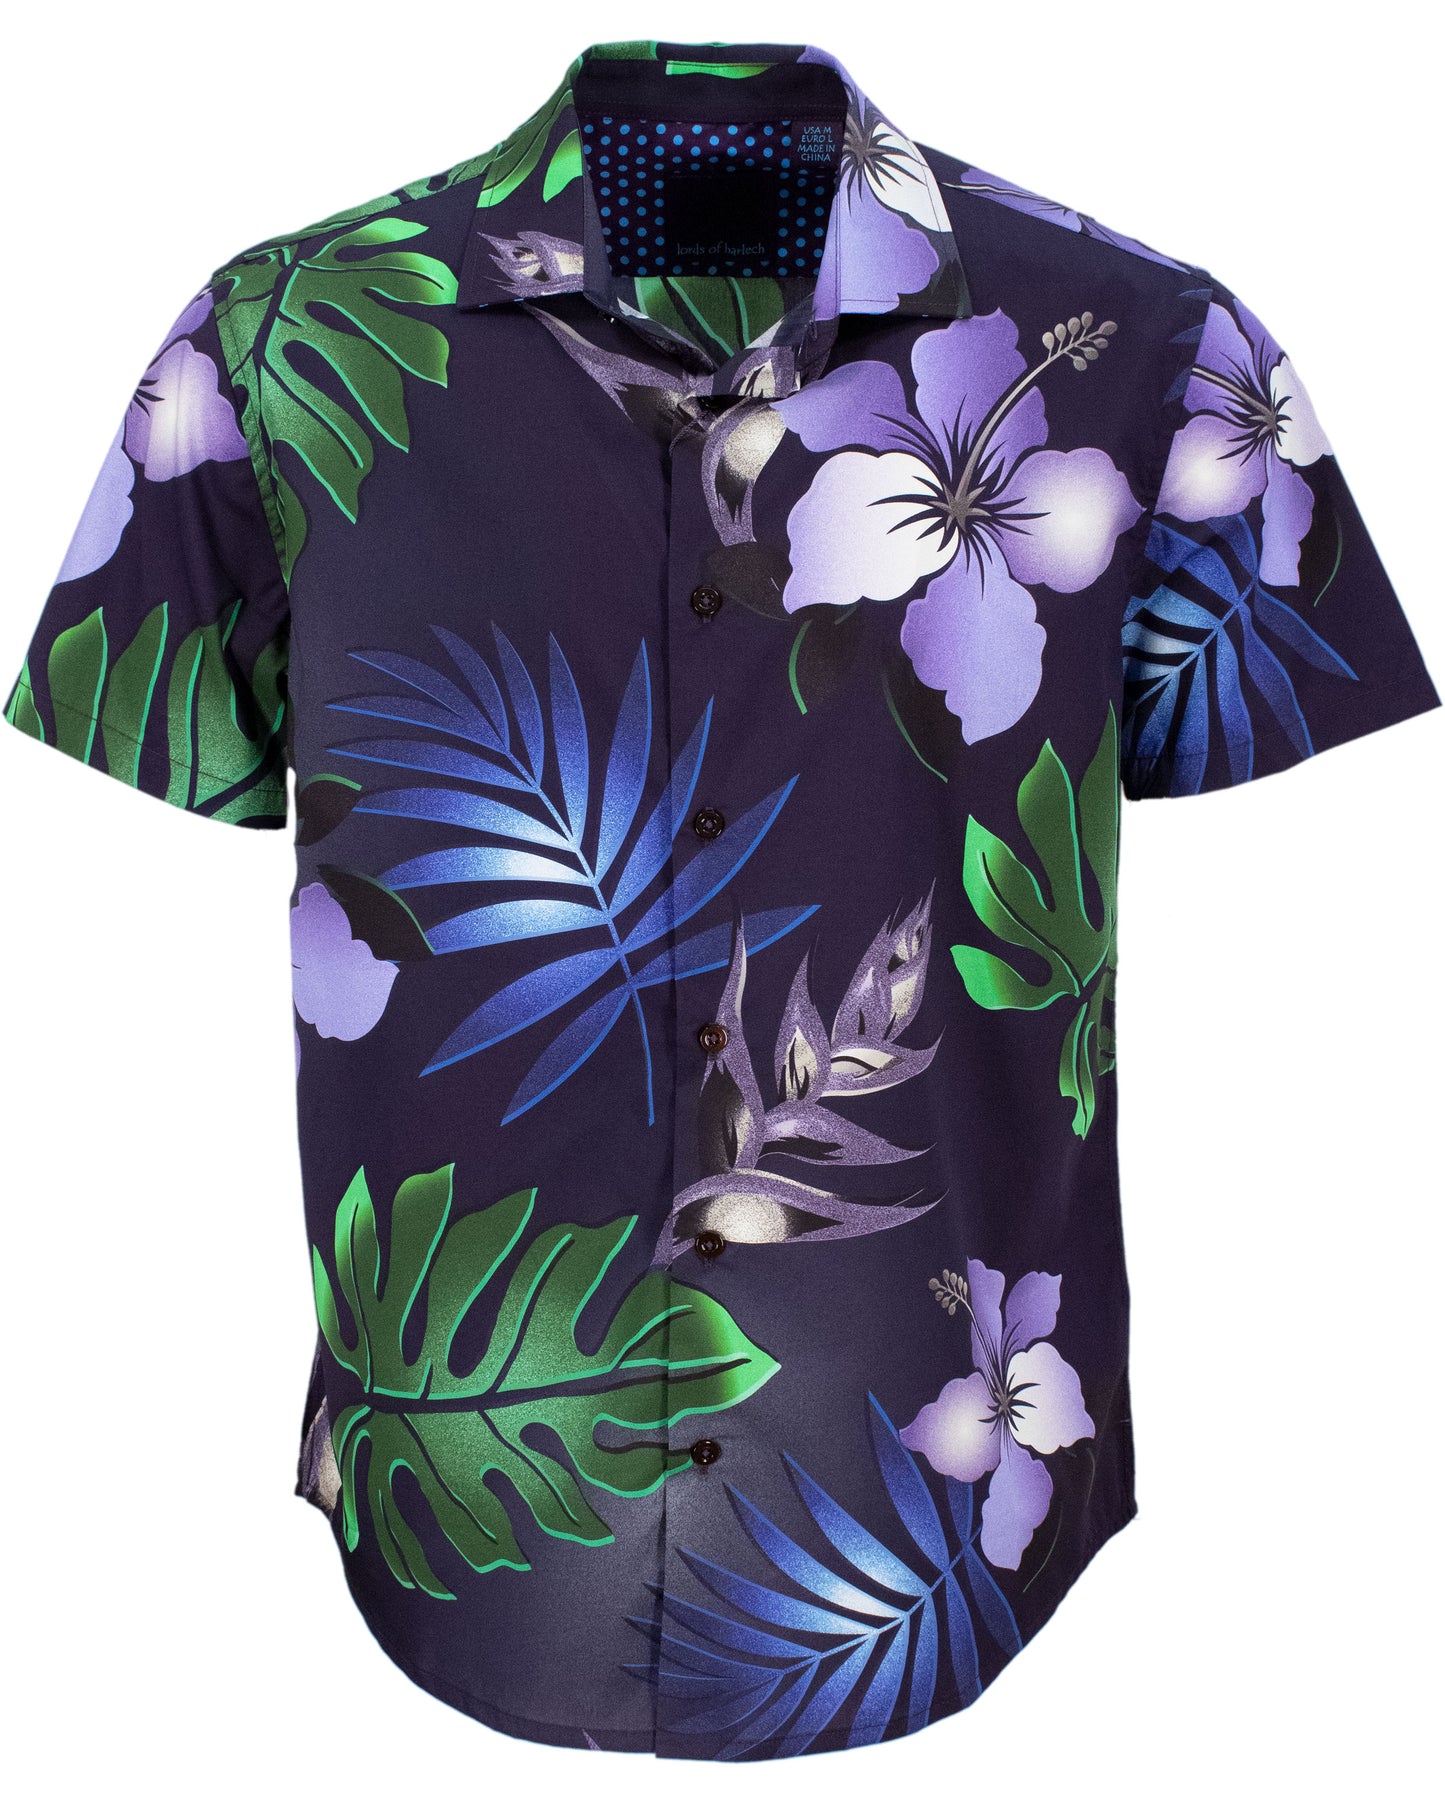 GEORGE TROPICAL EXPLOSION SHIRT - NAVY